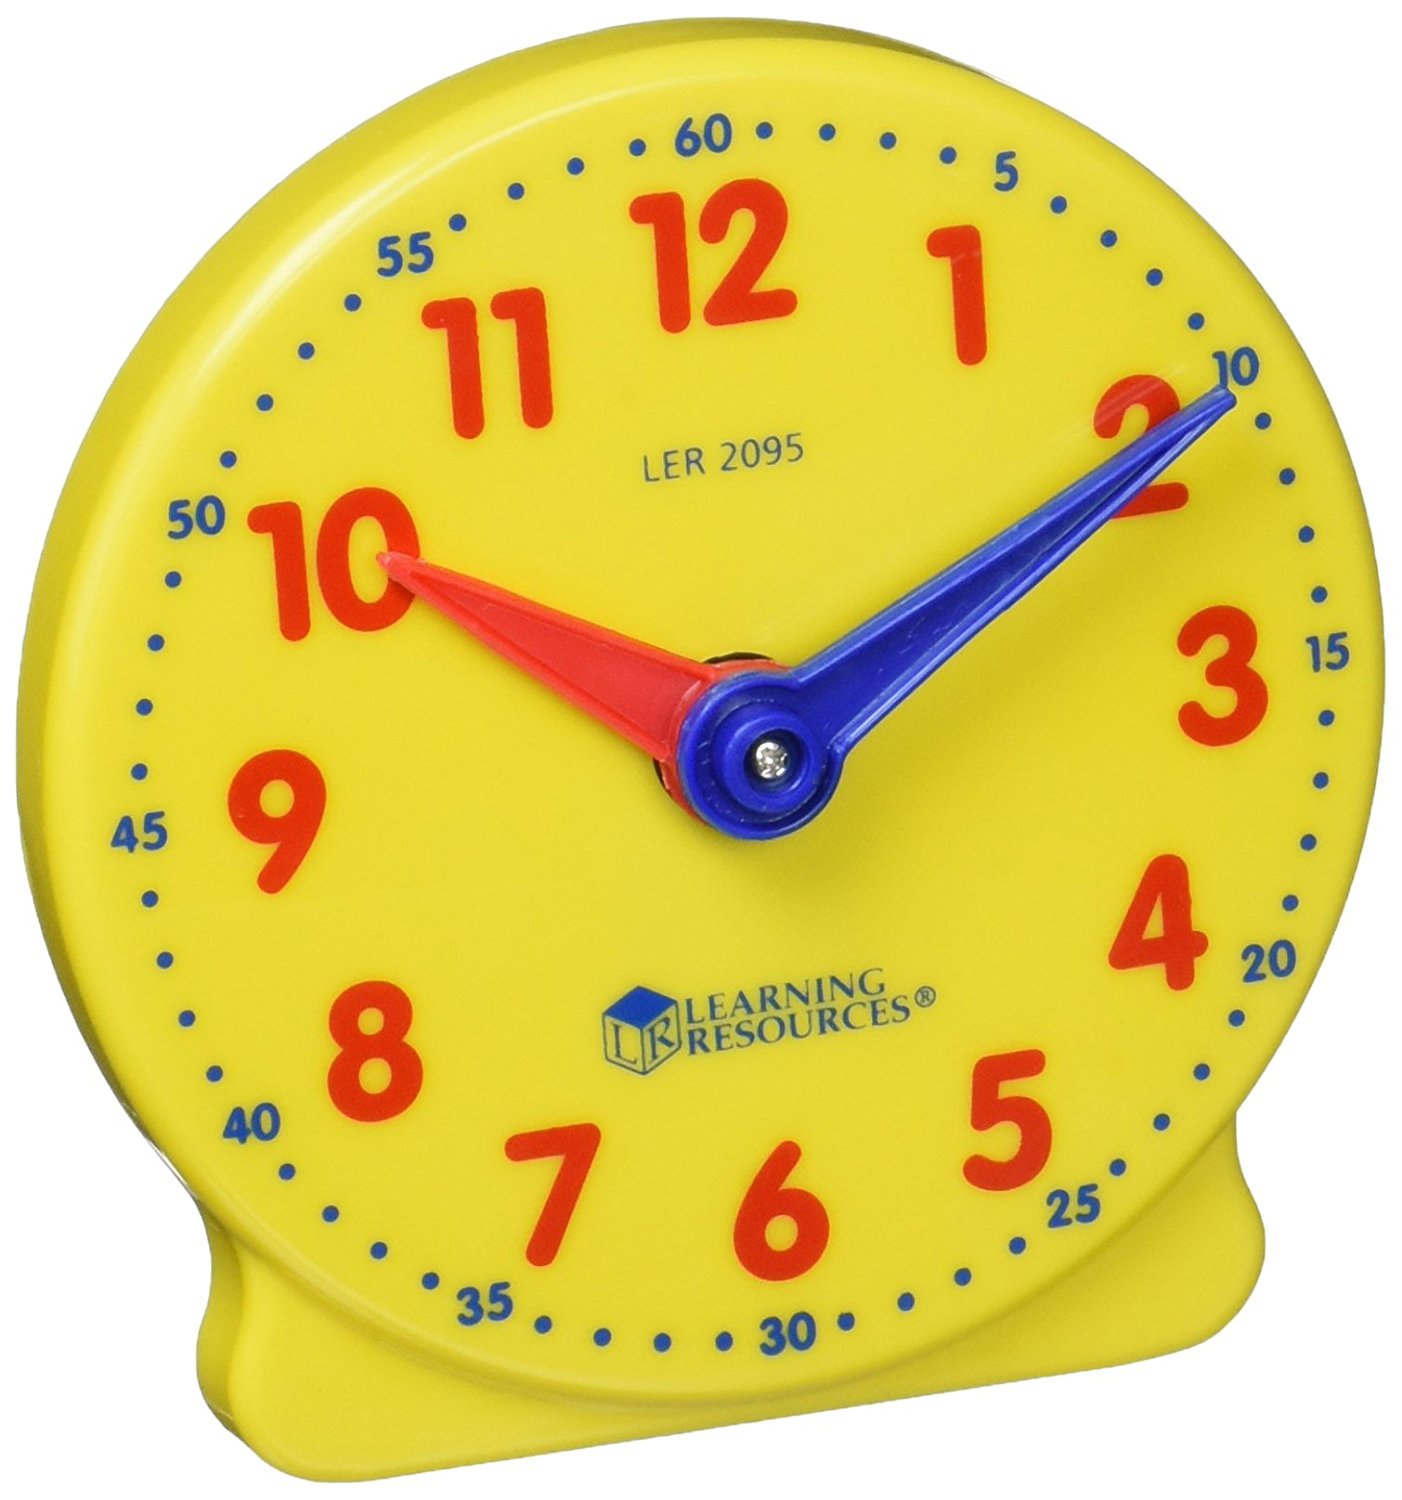 Amazon.com: Learning Resources Big Time Student Clock, 12 Hour ...